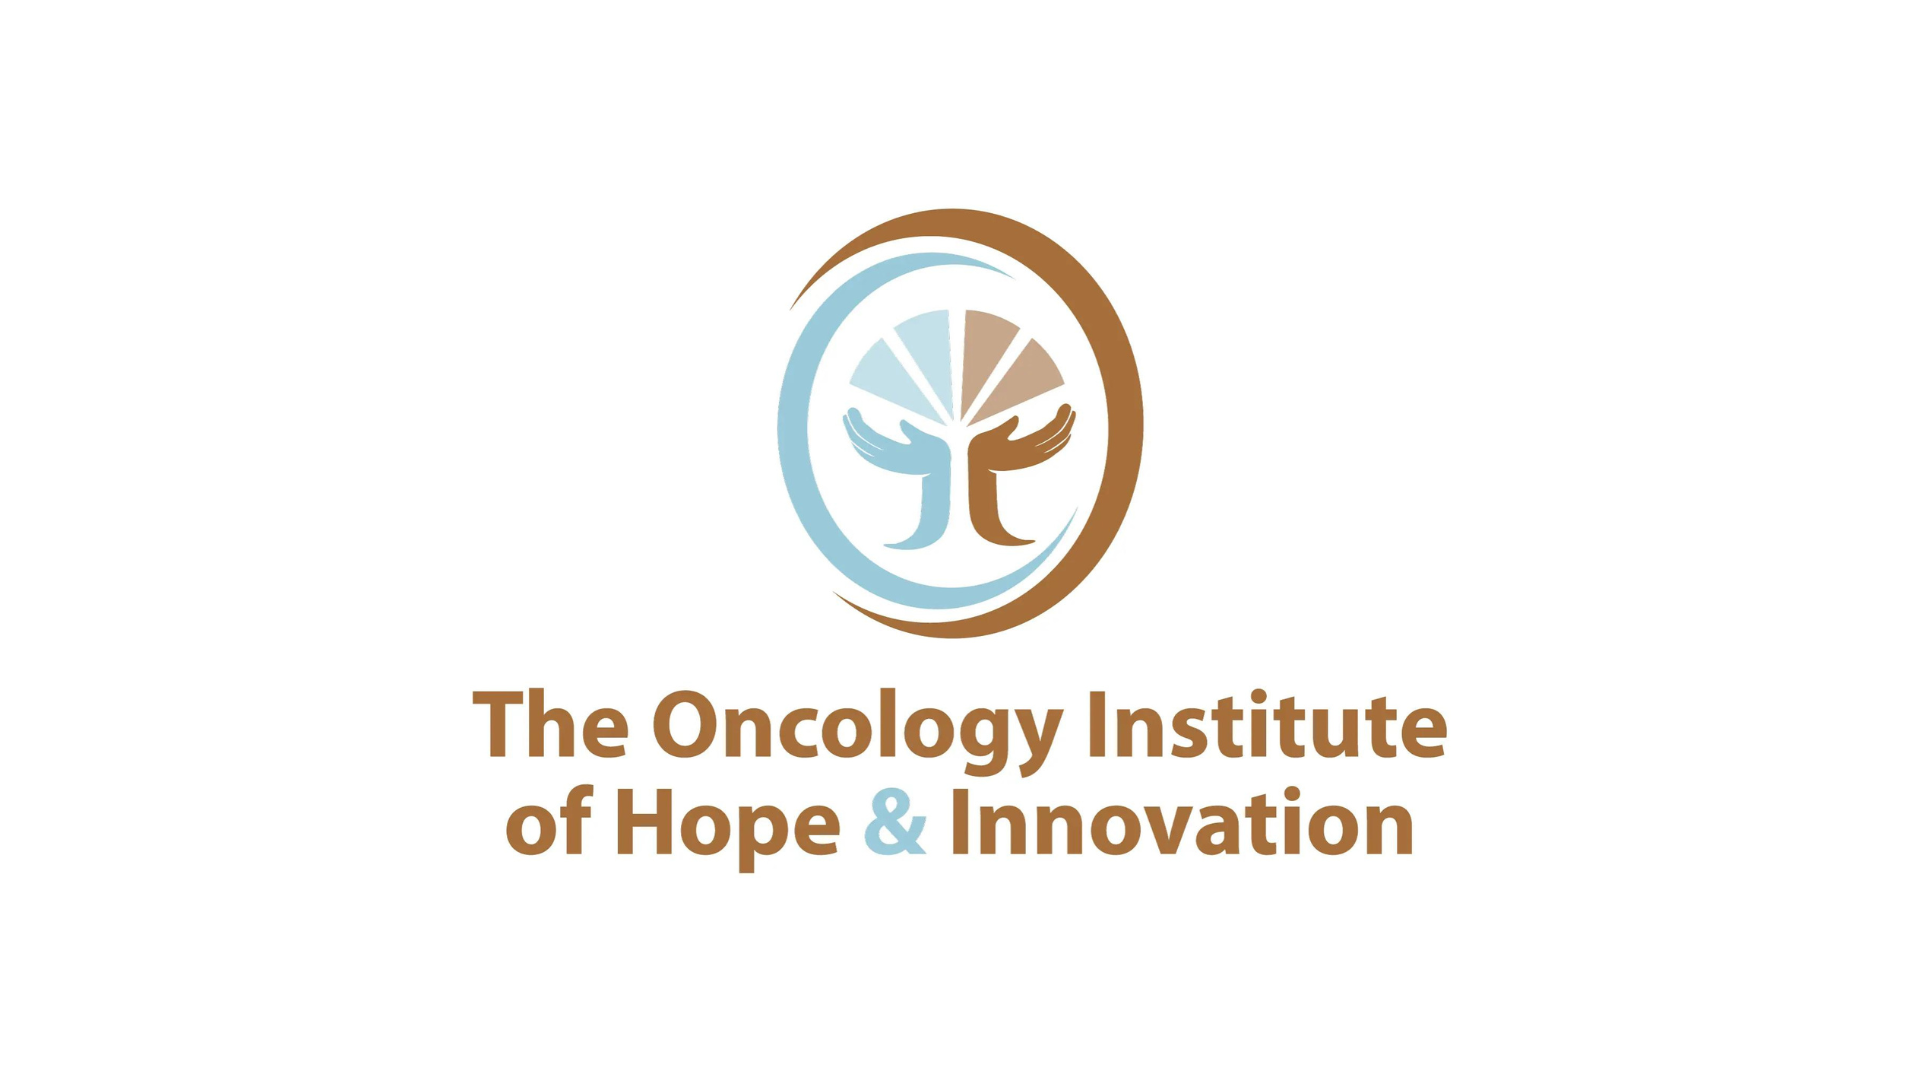 The Oncology Institute Partners with Blue Note Therapeutics to Provide a Digital Therapeutic for Treating Cancer-related Anxiety and Depression Symptoms